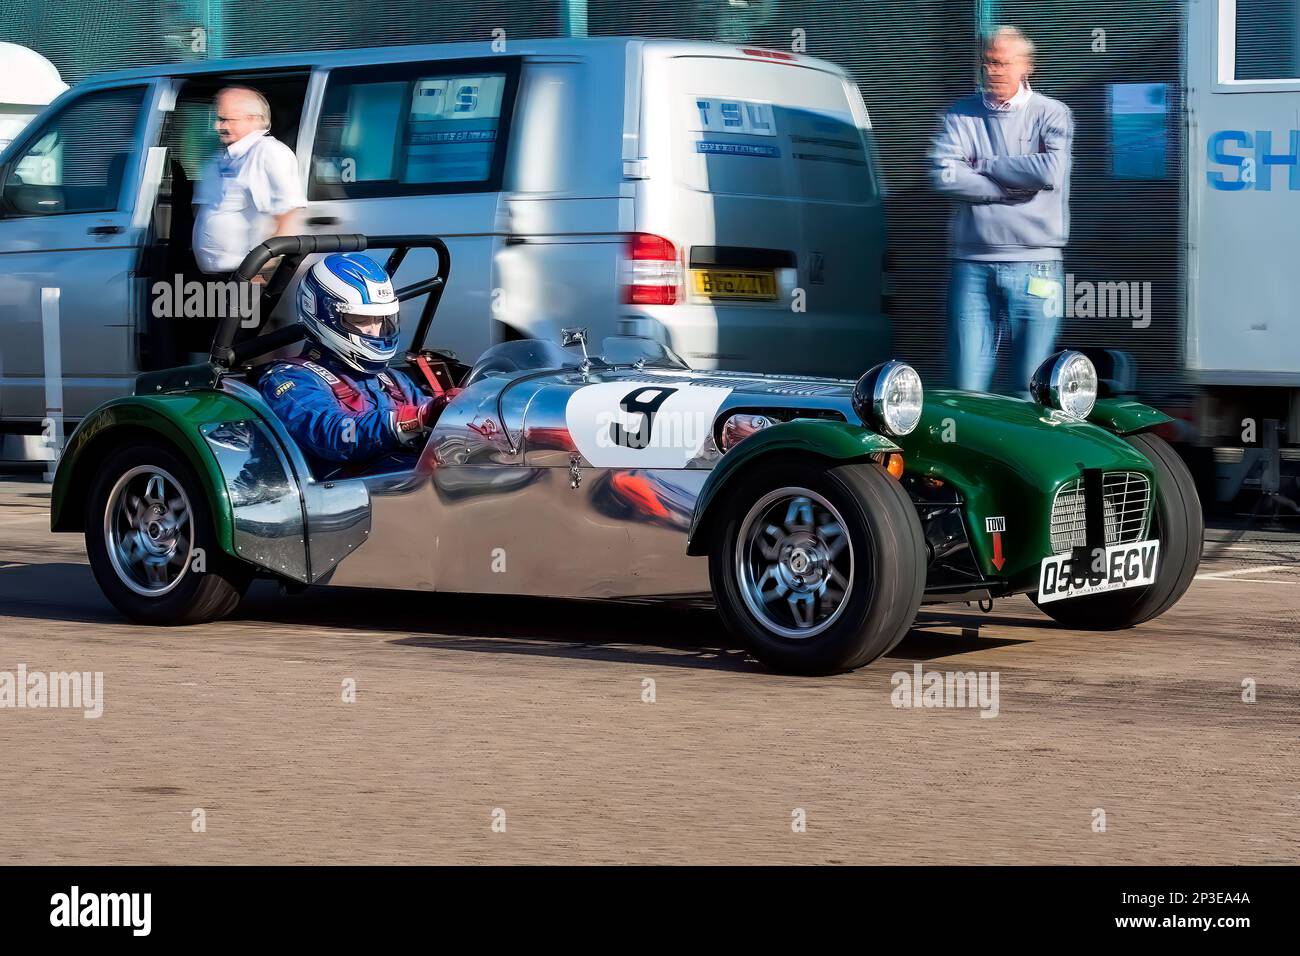 George Cubitt driving a Caterham 7 at The Brighton National Speed Trials 2017. This is the oldest motor racing event in the UK and is held in the south east coastal town of Brighton. Madeira drive is a road which runs along the seafront and is normal full of people explorer the beach, pier and local attractions. Today it is turned in to a 1/4 time trial course. 2nd September 2017 Stock Photo